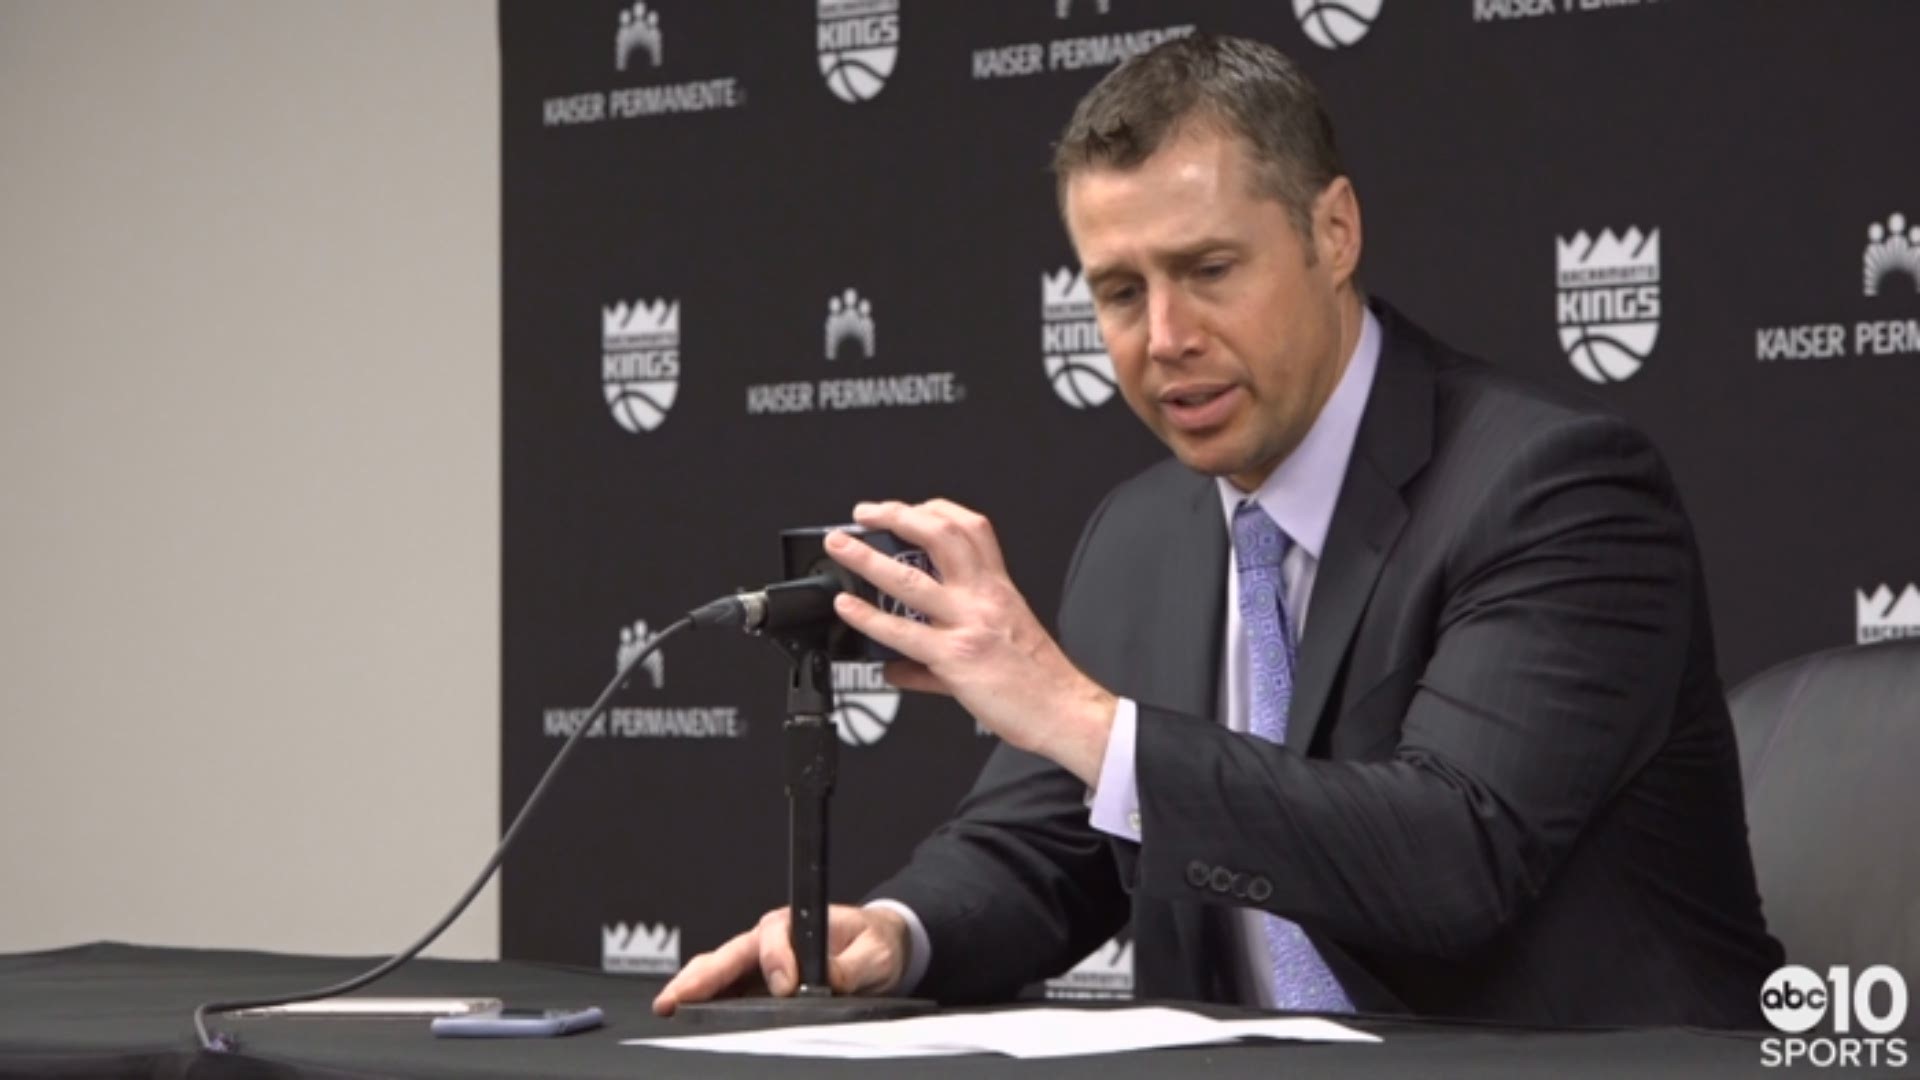 Kings head coach Dave Joerger breaks-down Wednesday's lopsided win over the Atlanta Hawks, the career performances from Harry Giles and Marvin Bagley III and entering the month of February with a winning record for the first time since the 2004-05 season.